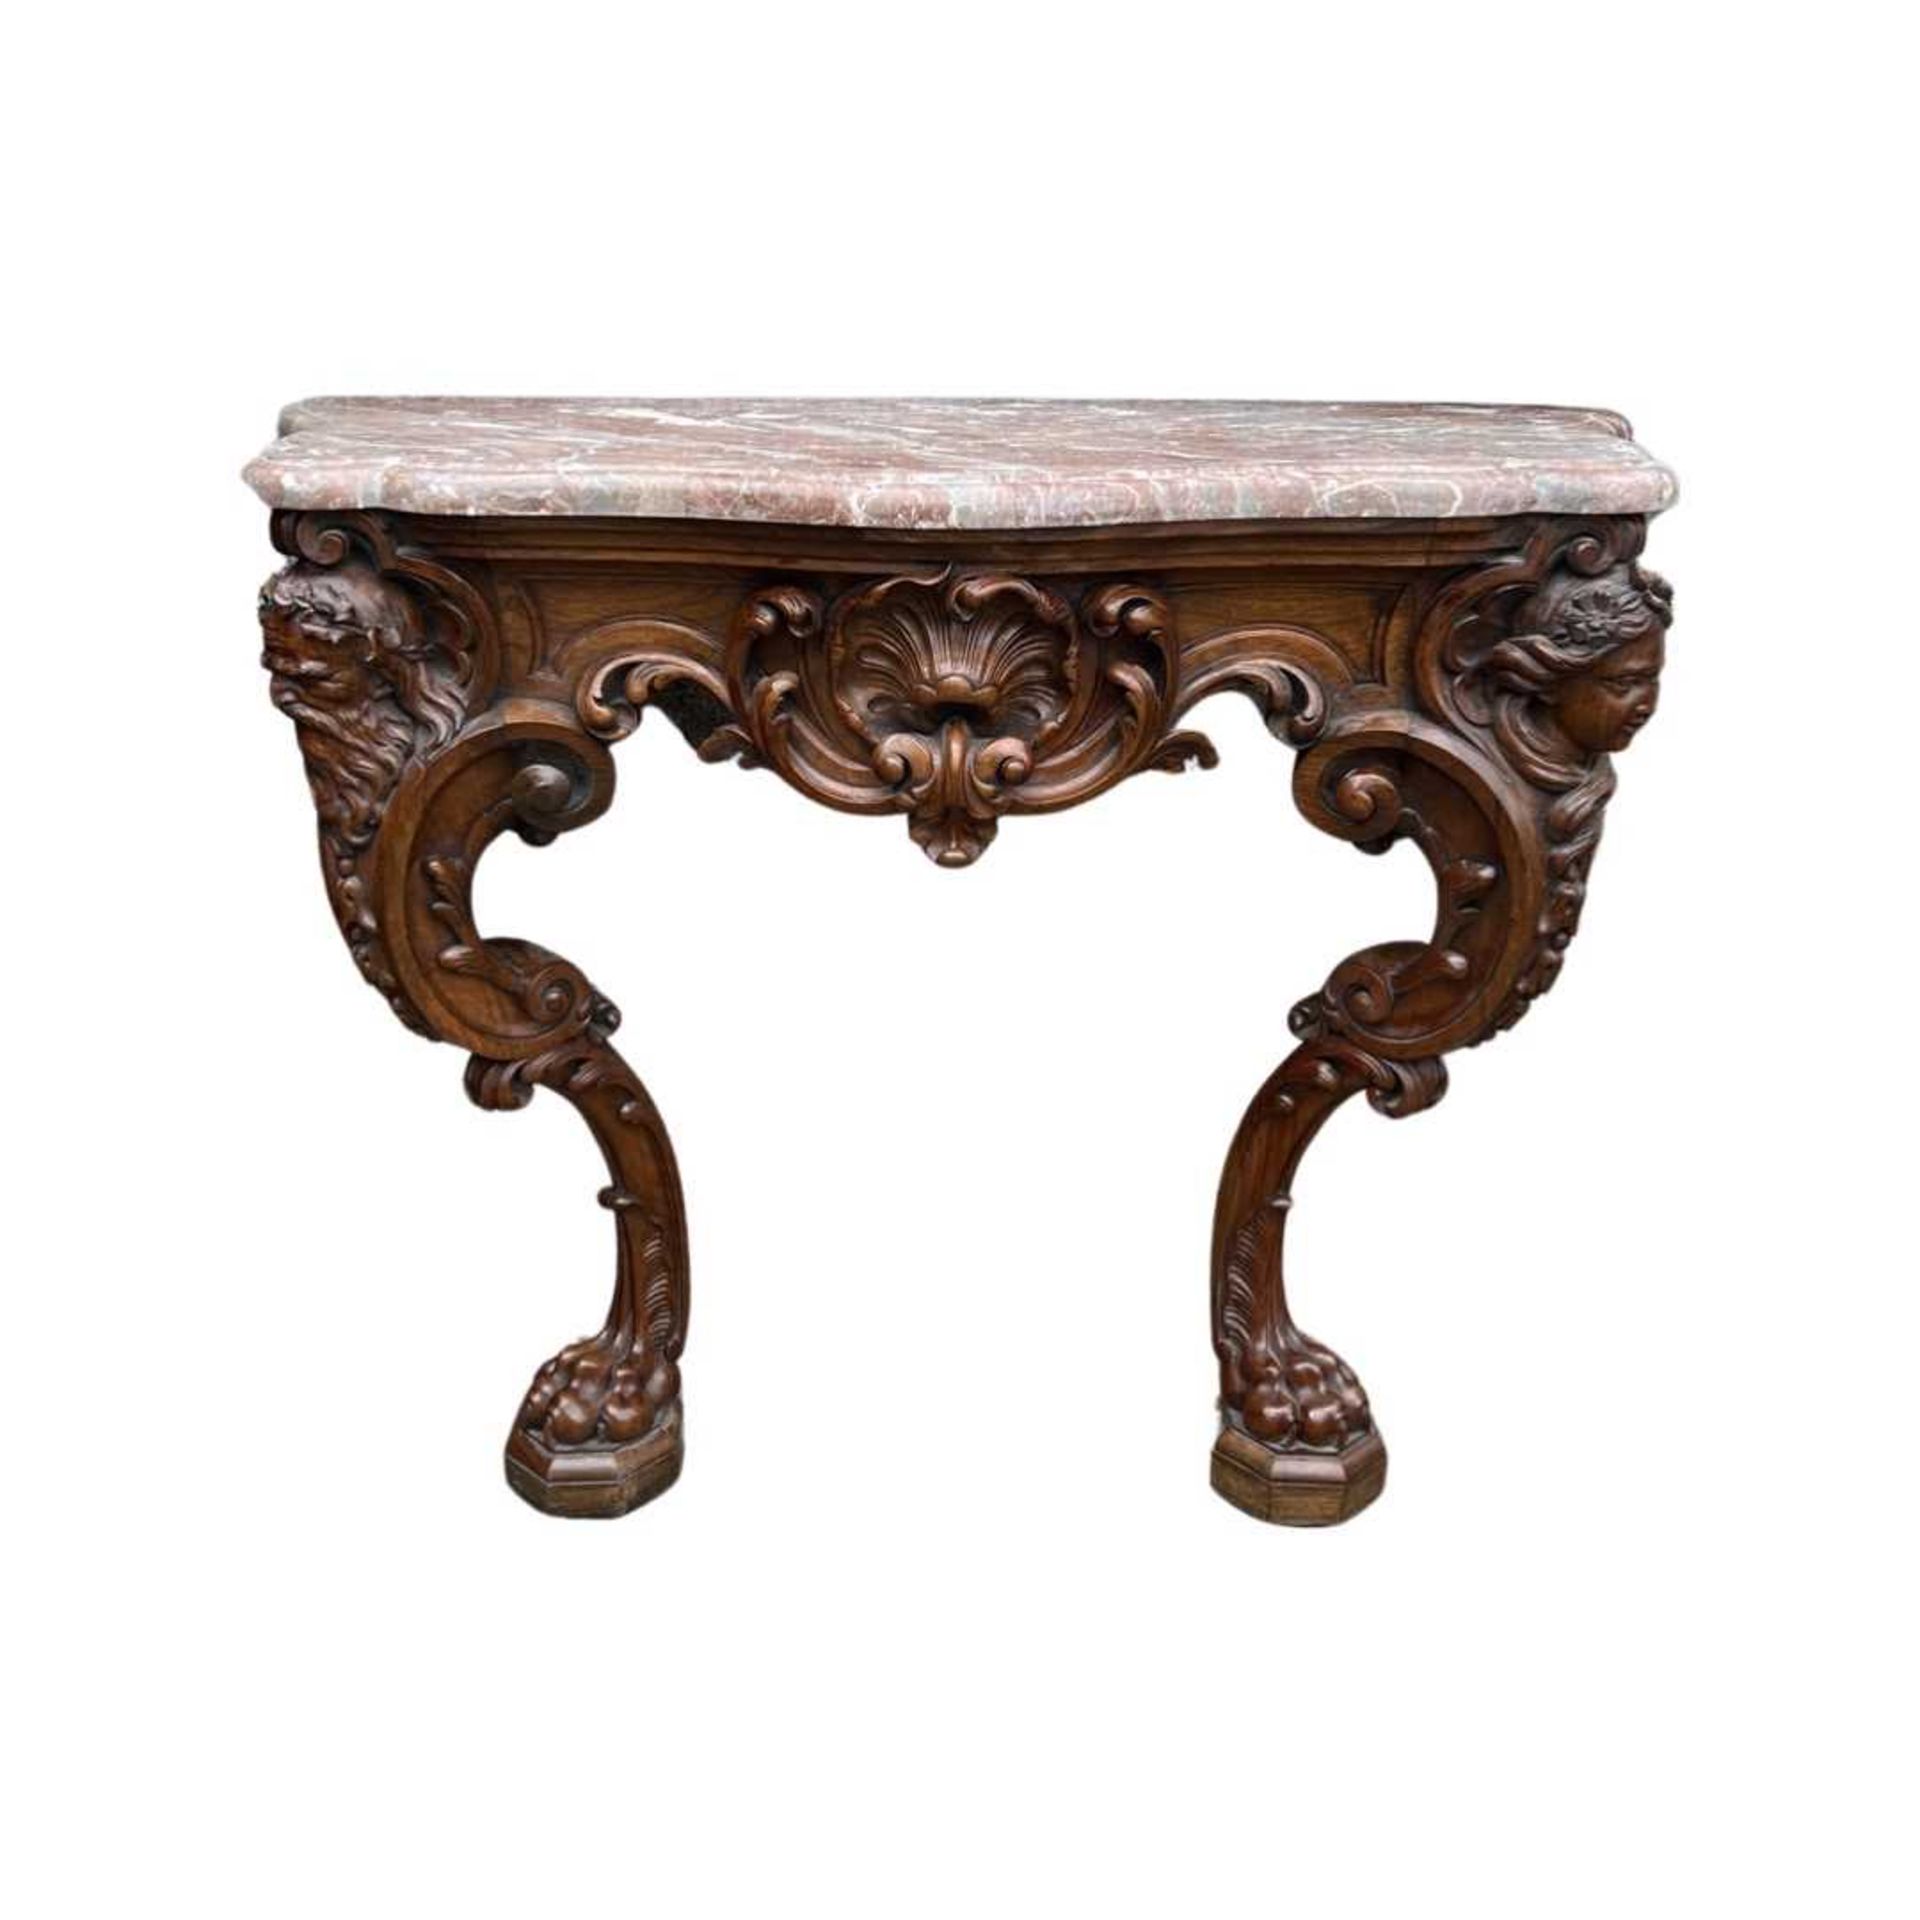 A FINE 19TH CENTURY IRISH WALNUT AND MARBLE CONSOLE TABLE